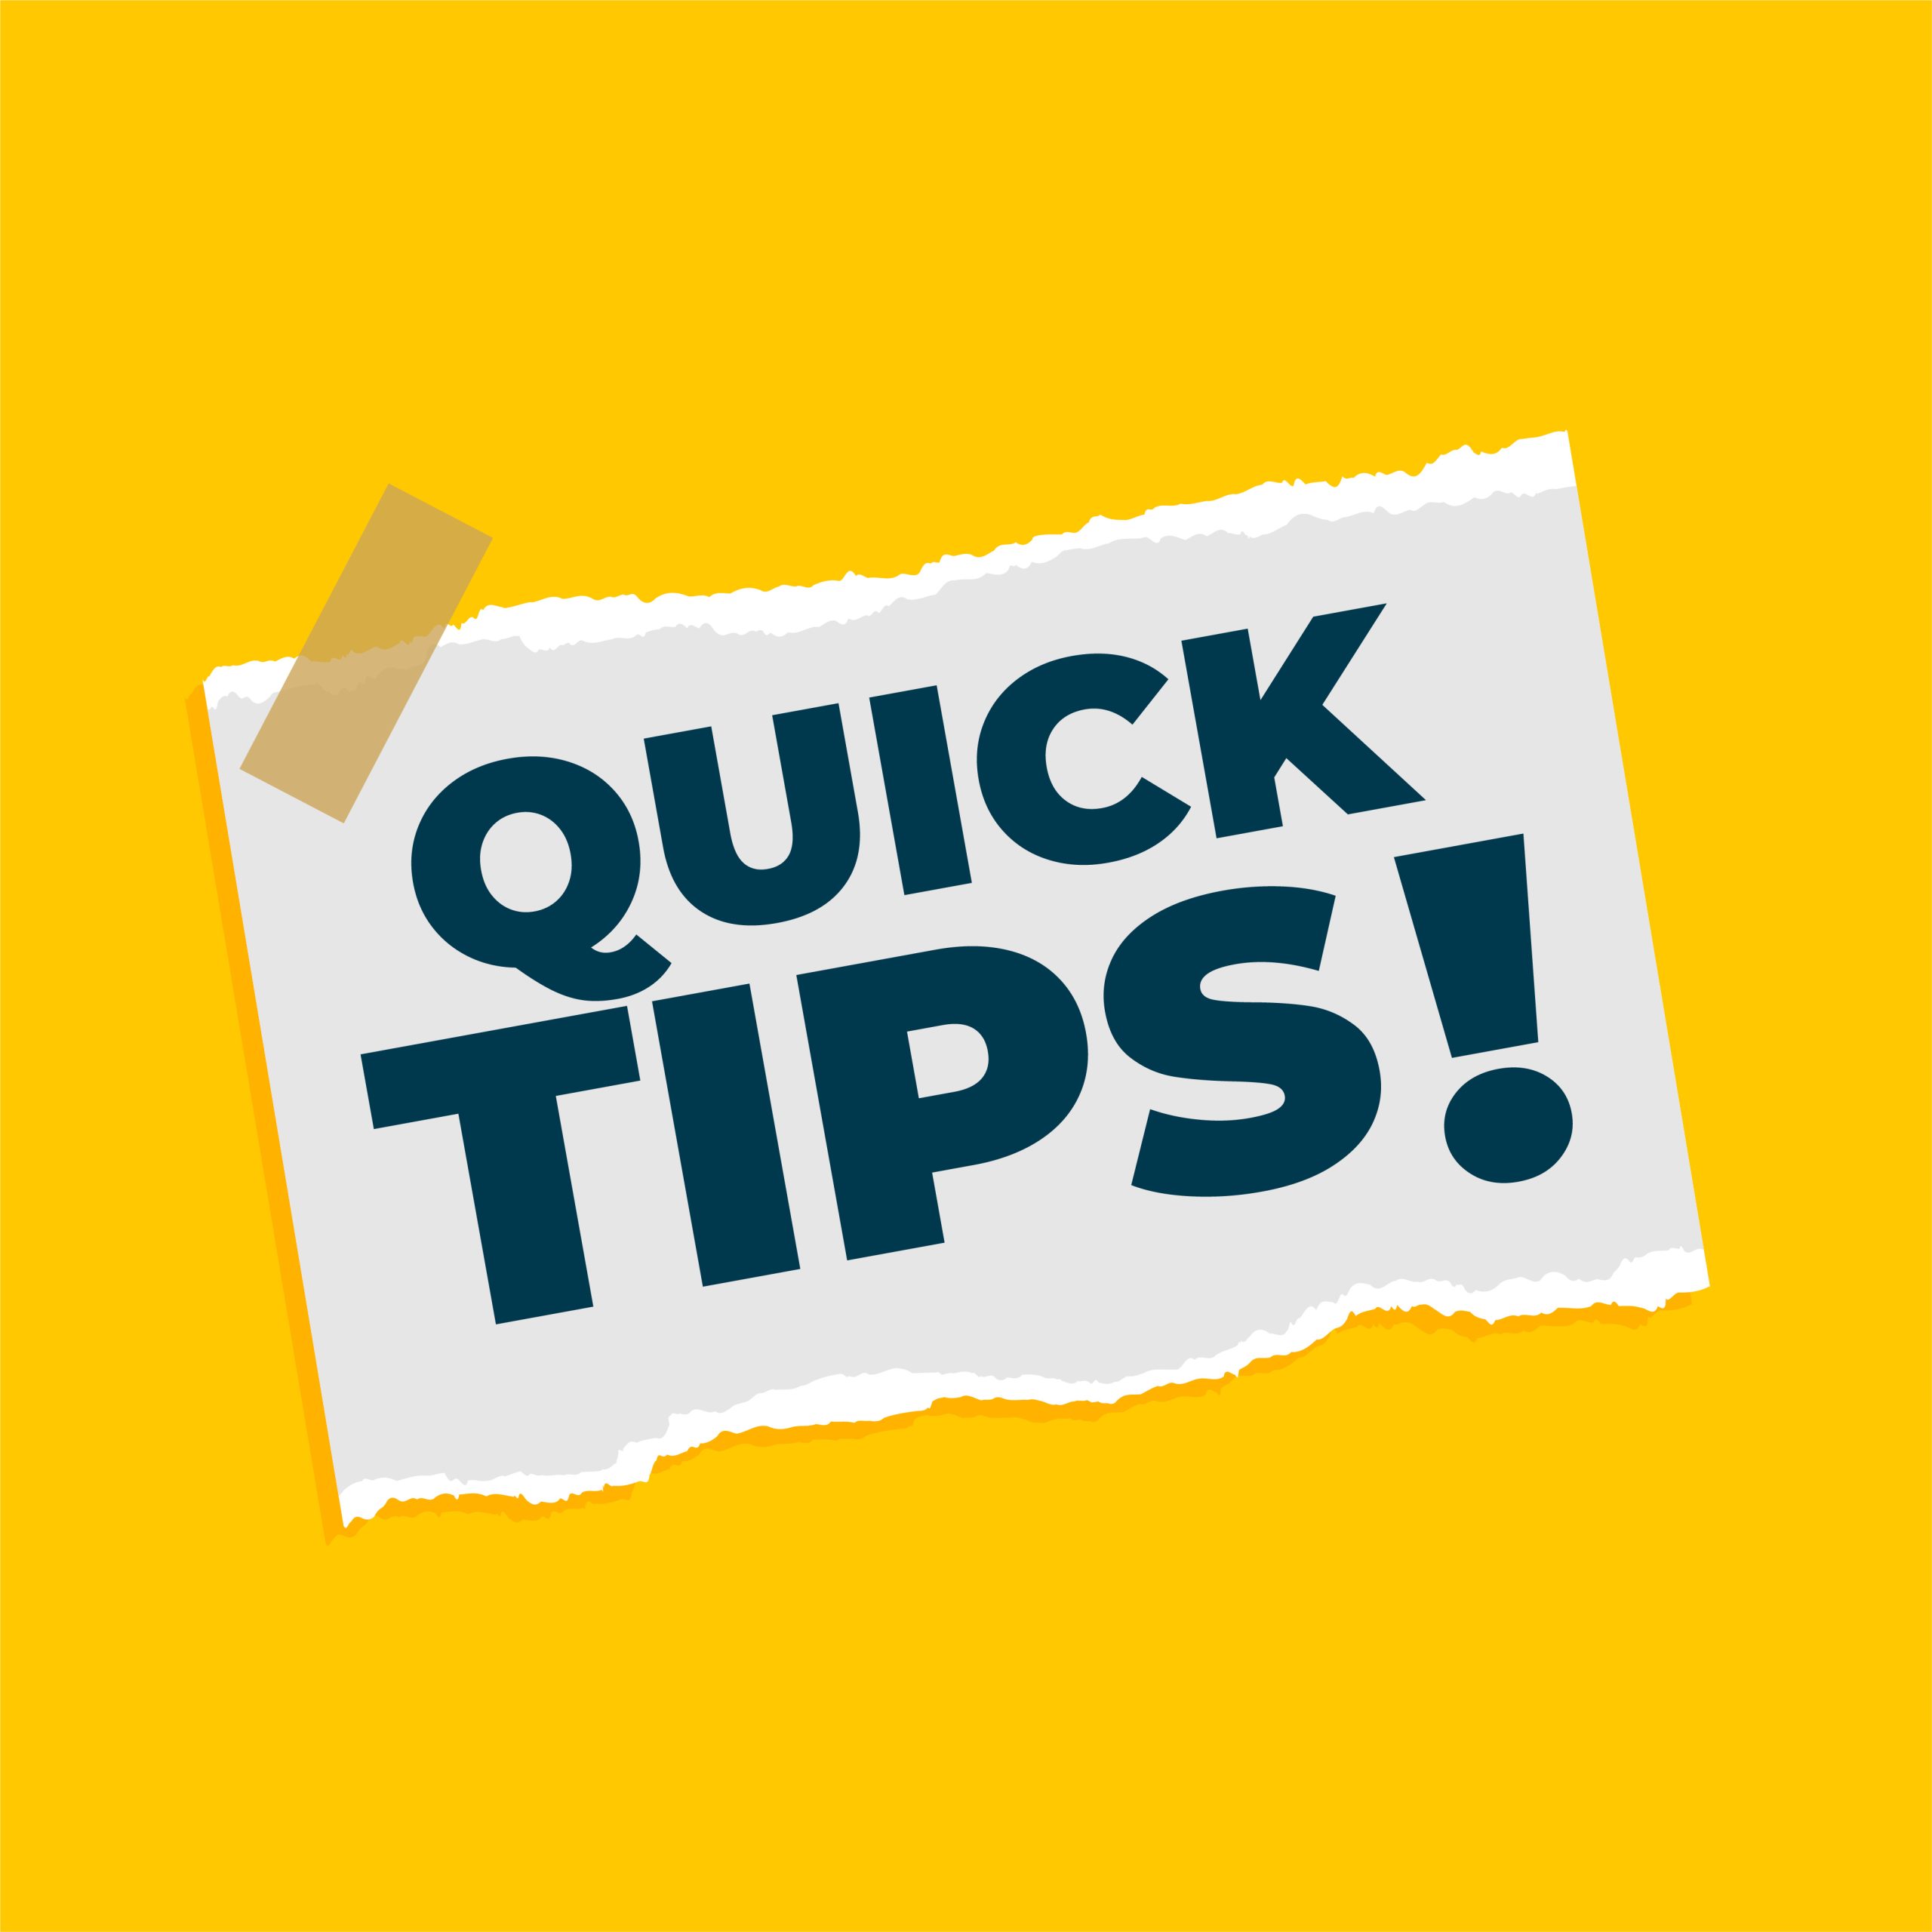 A note saying "Quick tips" on yellow background